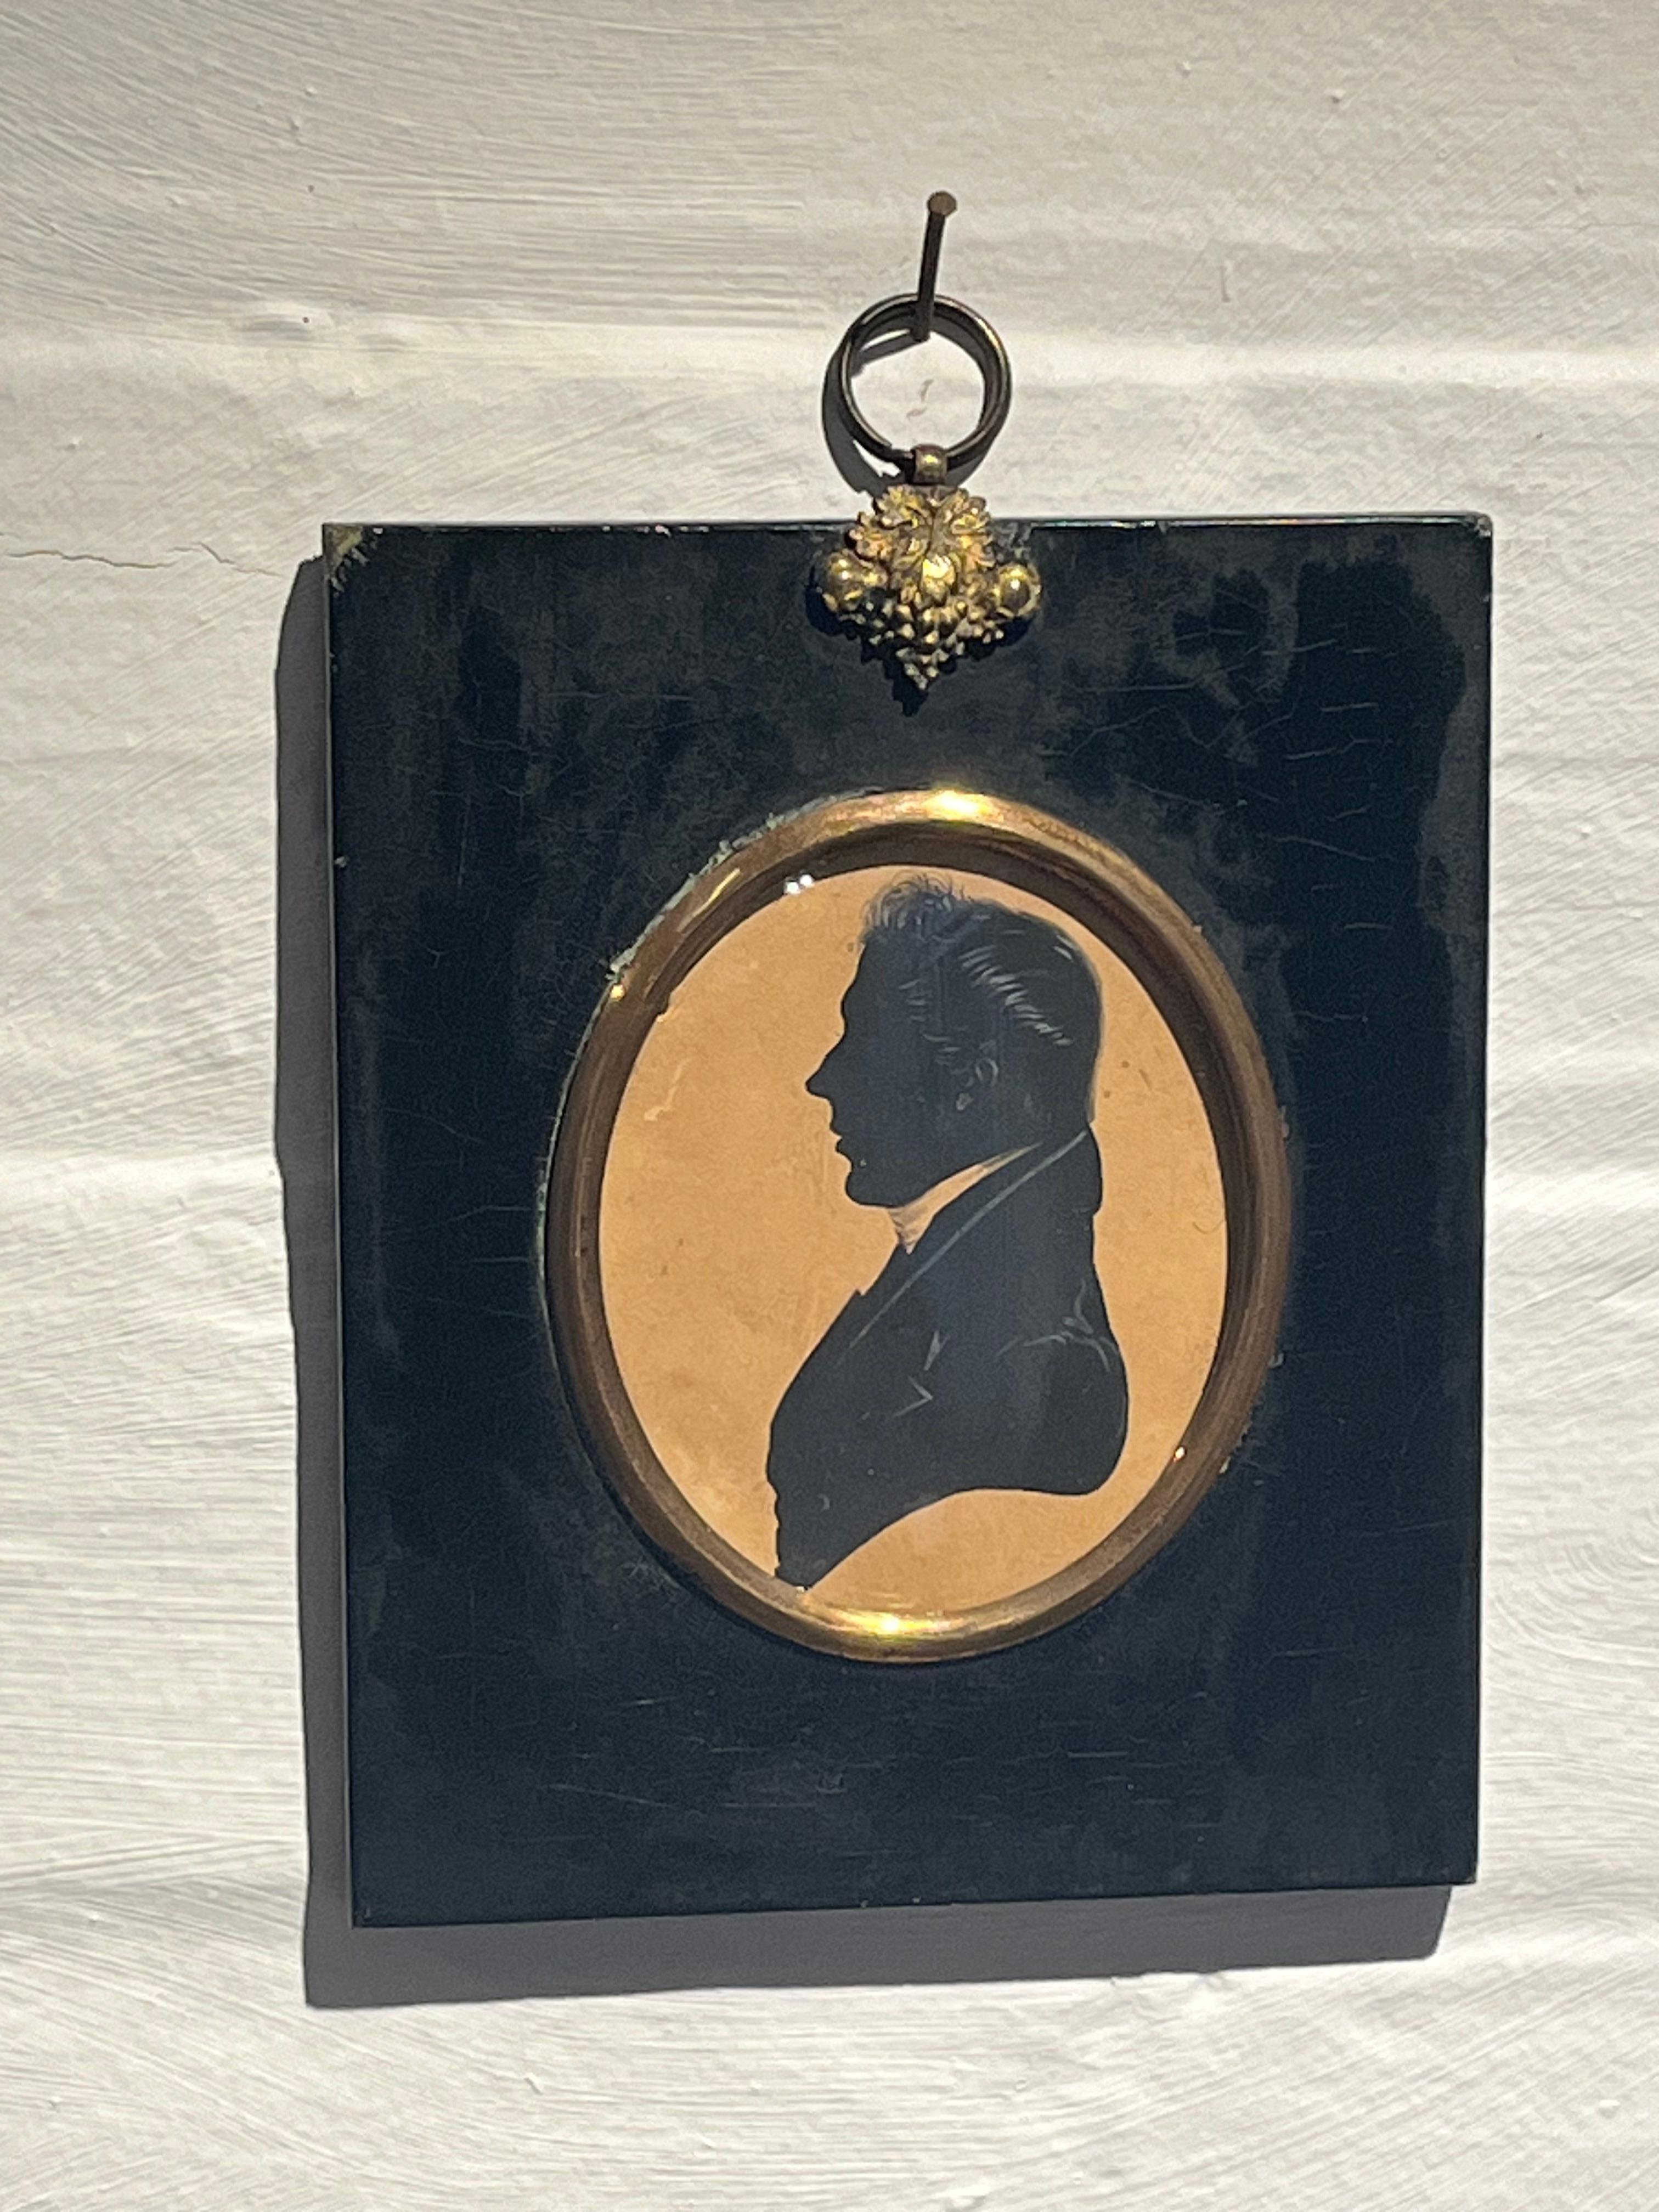 Frederick Frith mid 19th Century English Victorian silhouette portrait For Sale 4